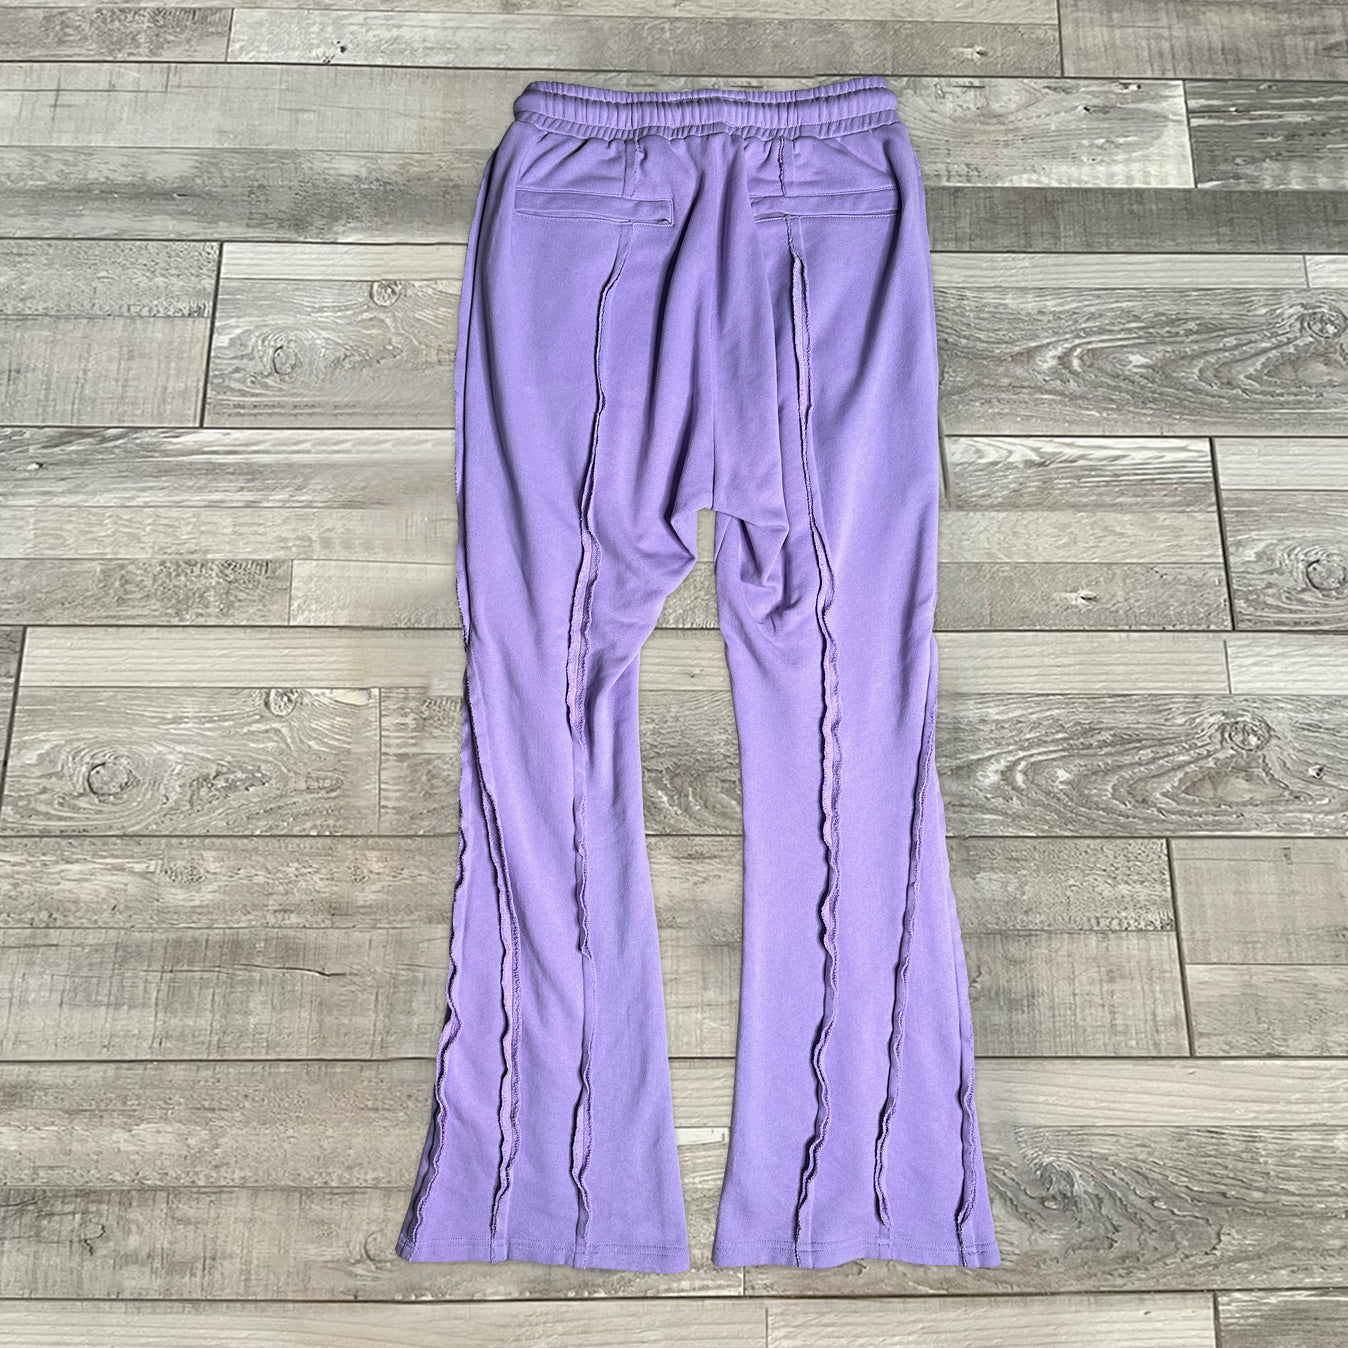 Casual retro paneled trousers